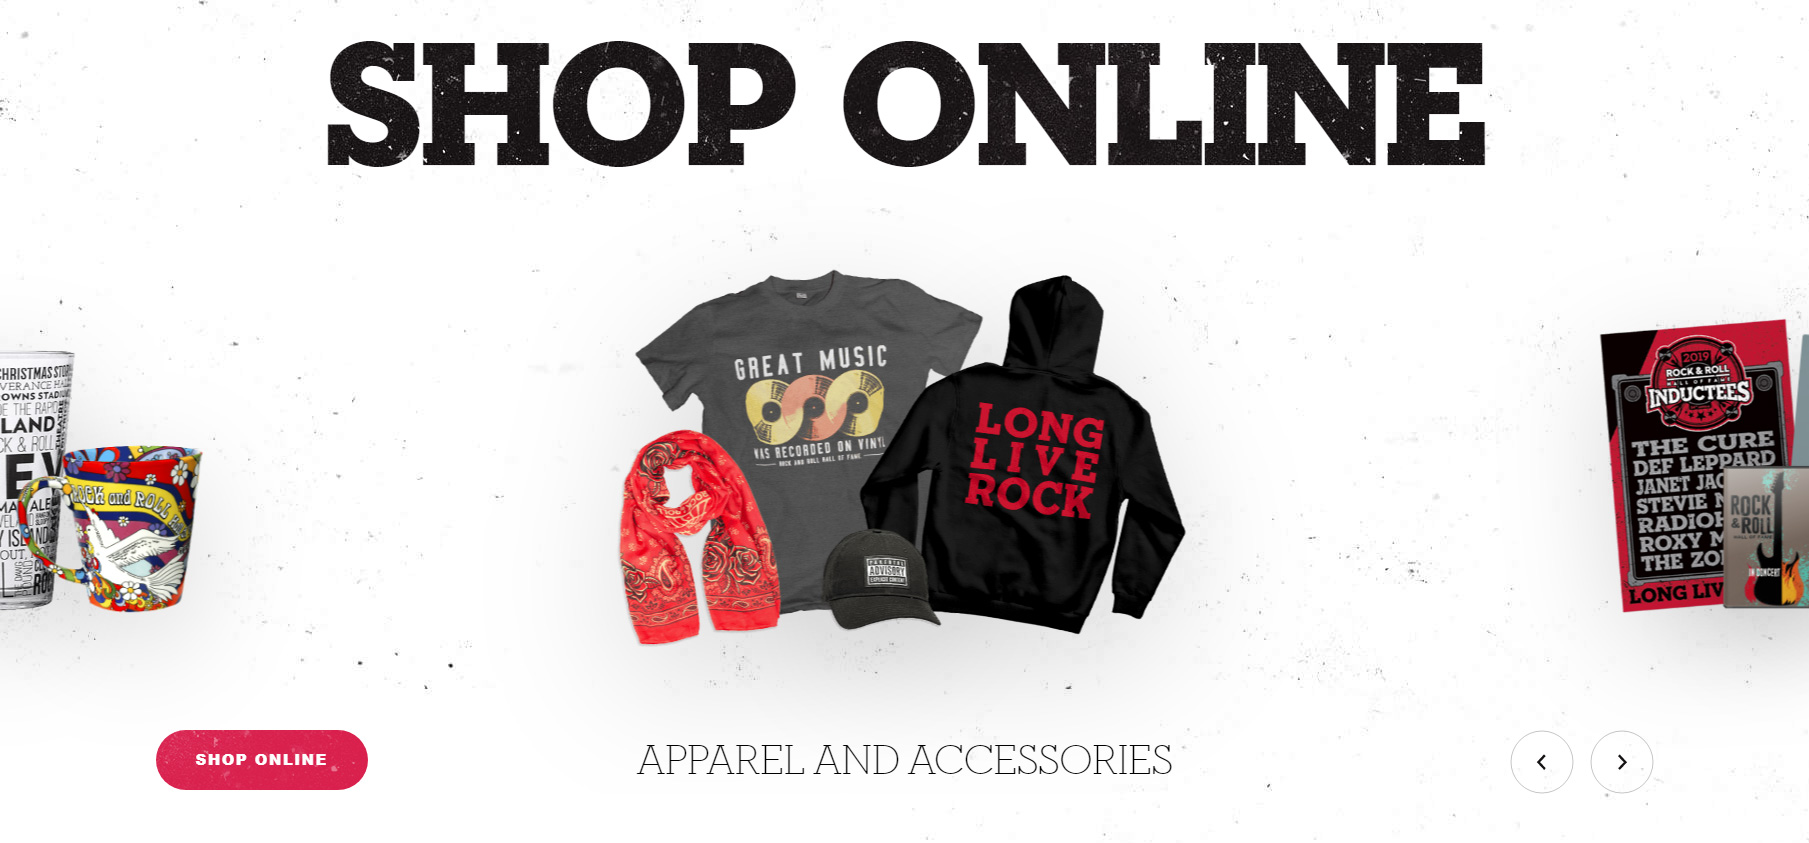 Rock & Roll Hall of Fame Museum - Website of the Day